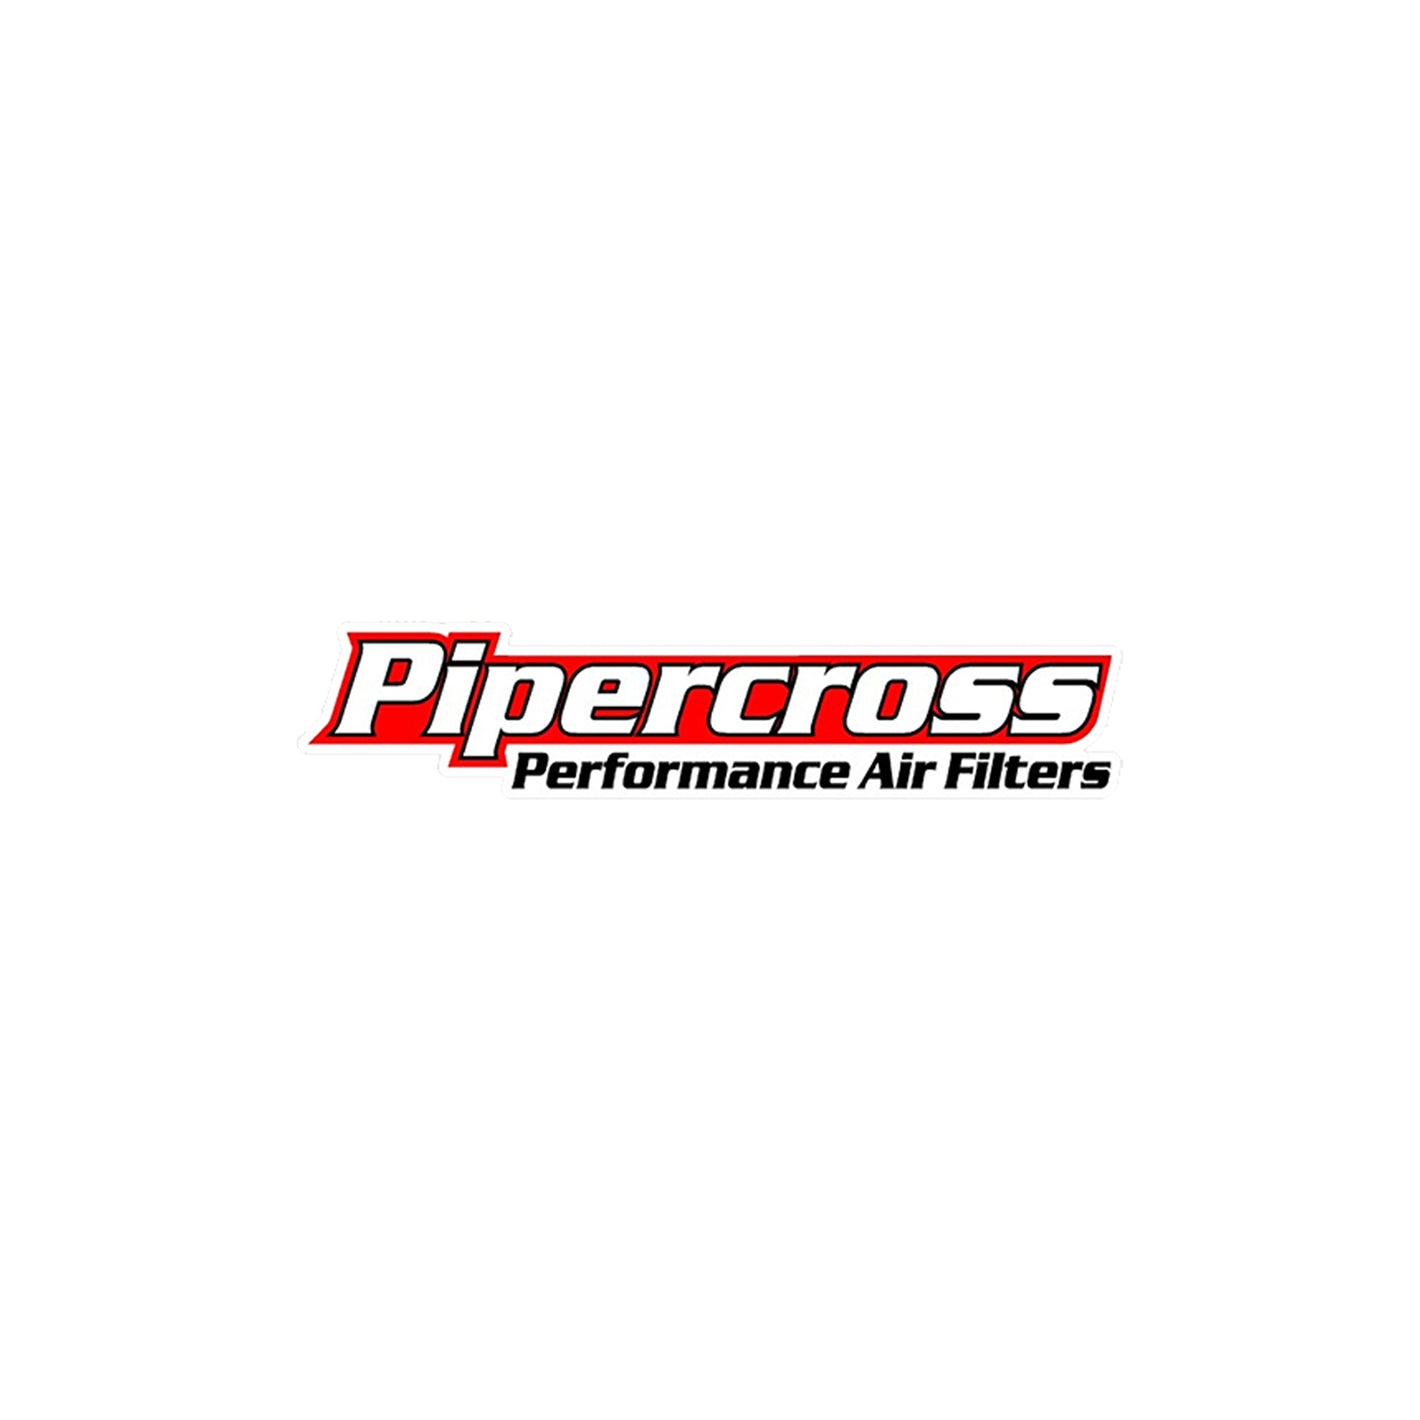 All Pipercross Products